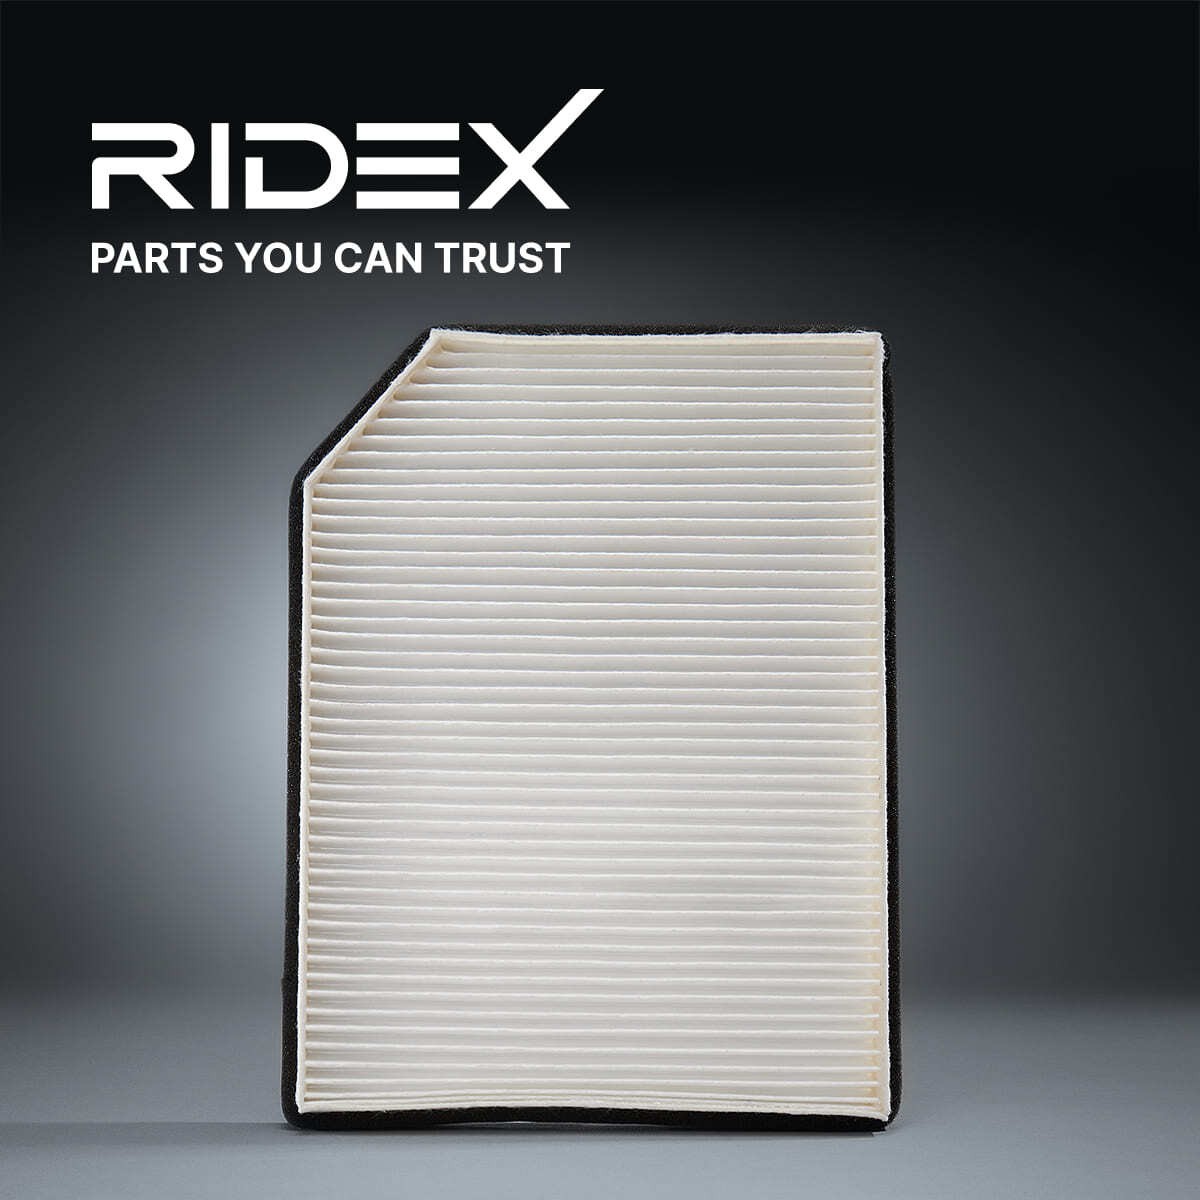 RIDEX 424I0216 Air conditioner filter Activated Carbon Filter, with Odour Absorbent Effect, Filter Insert, 288 mm x 210 mm x 58 mm, Asymmetrical